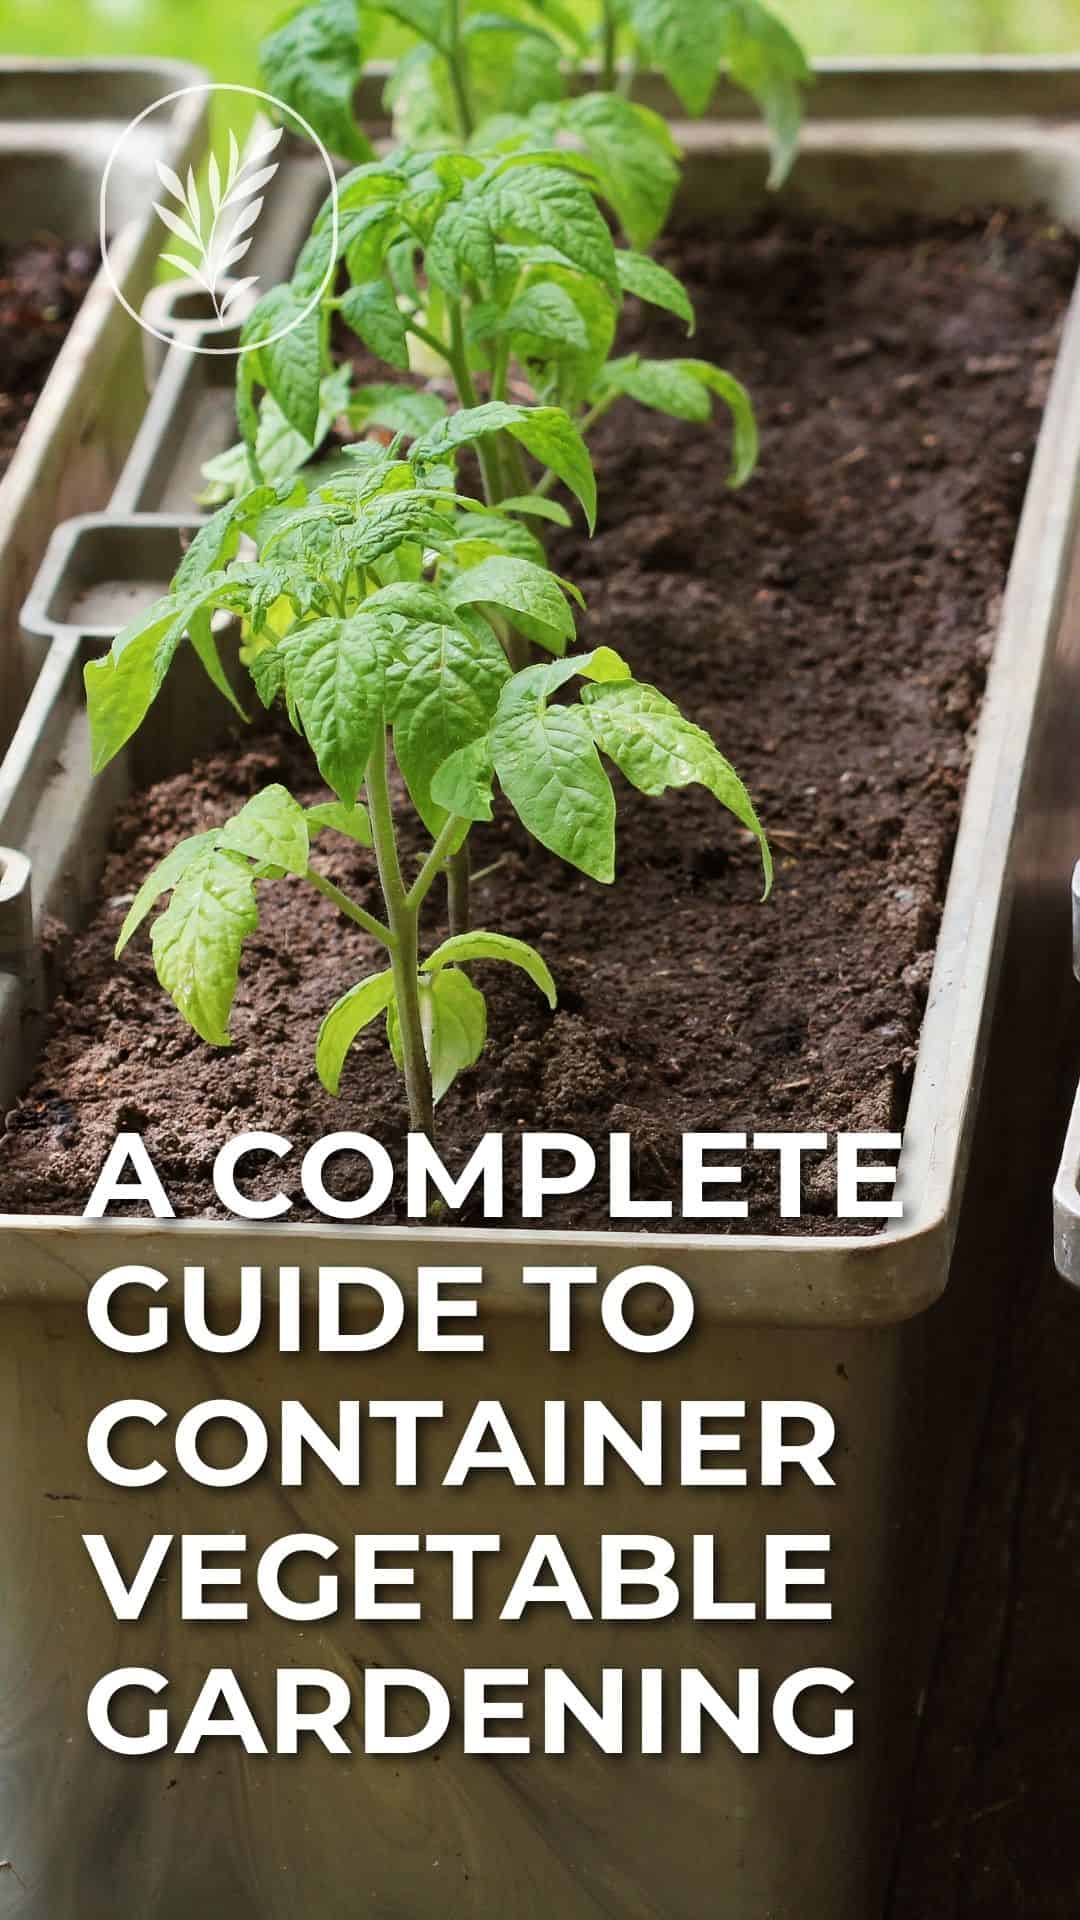 Container vegetable gardening a complete guide - story via @home4theharvest